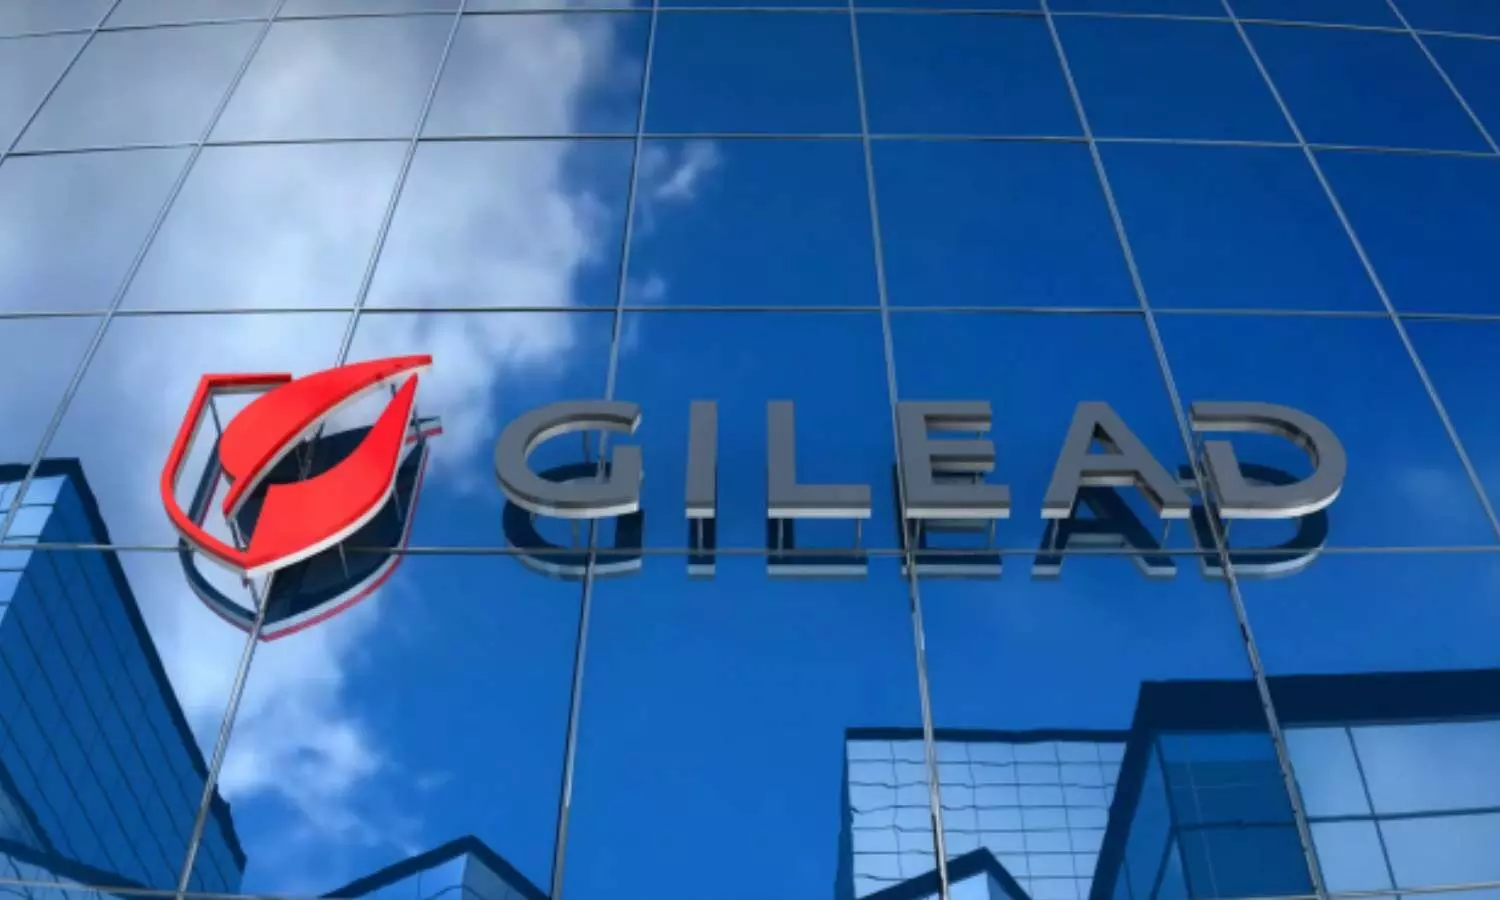 Gilead Sciences exercises option to license Nurixs investigational targeted protein degrader molecule NX-0479